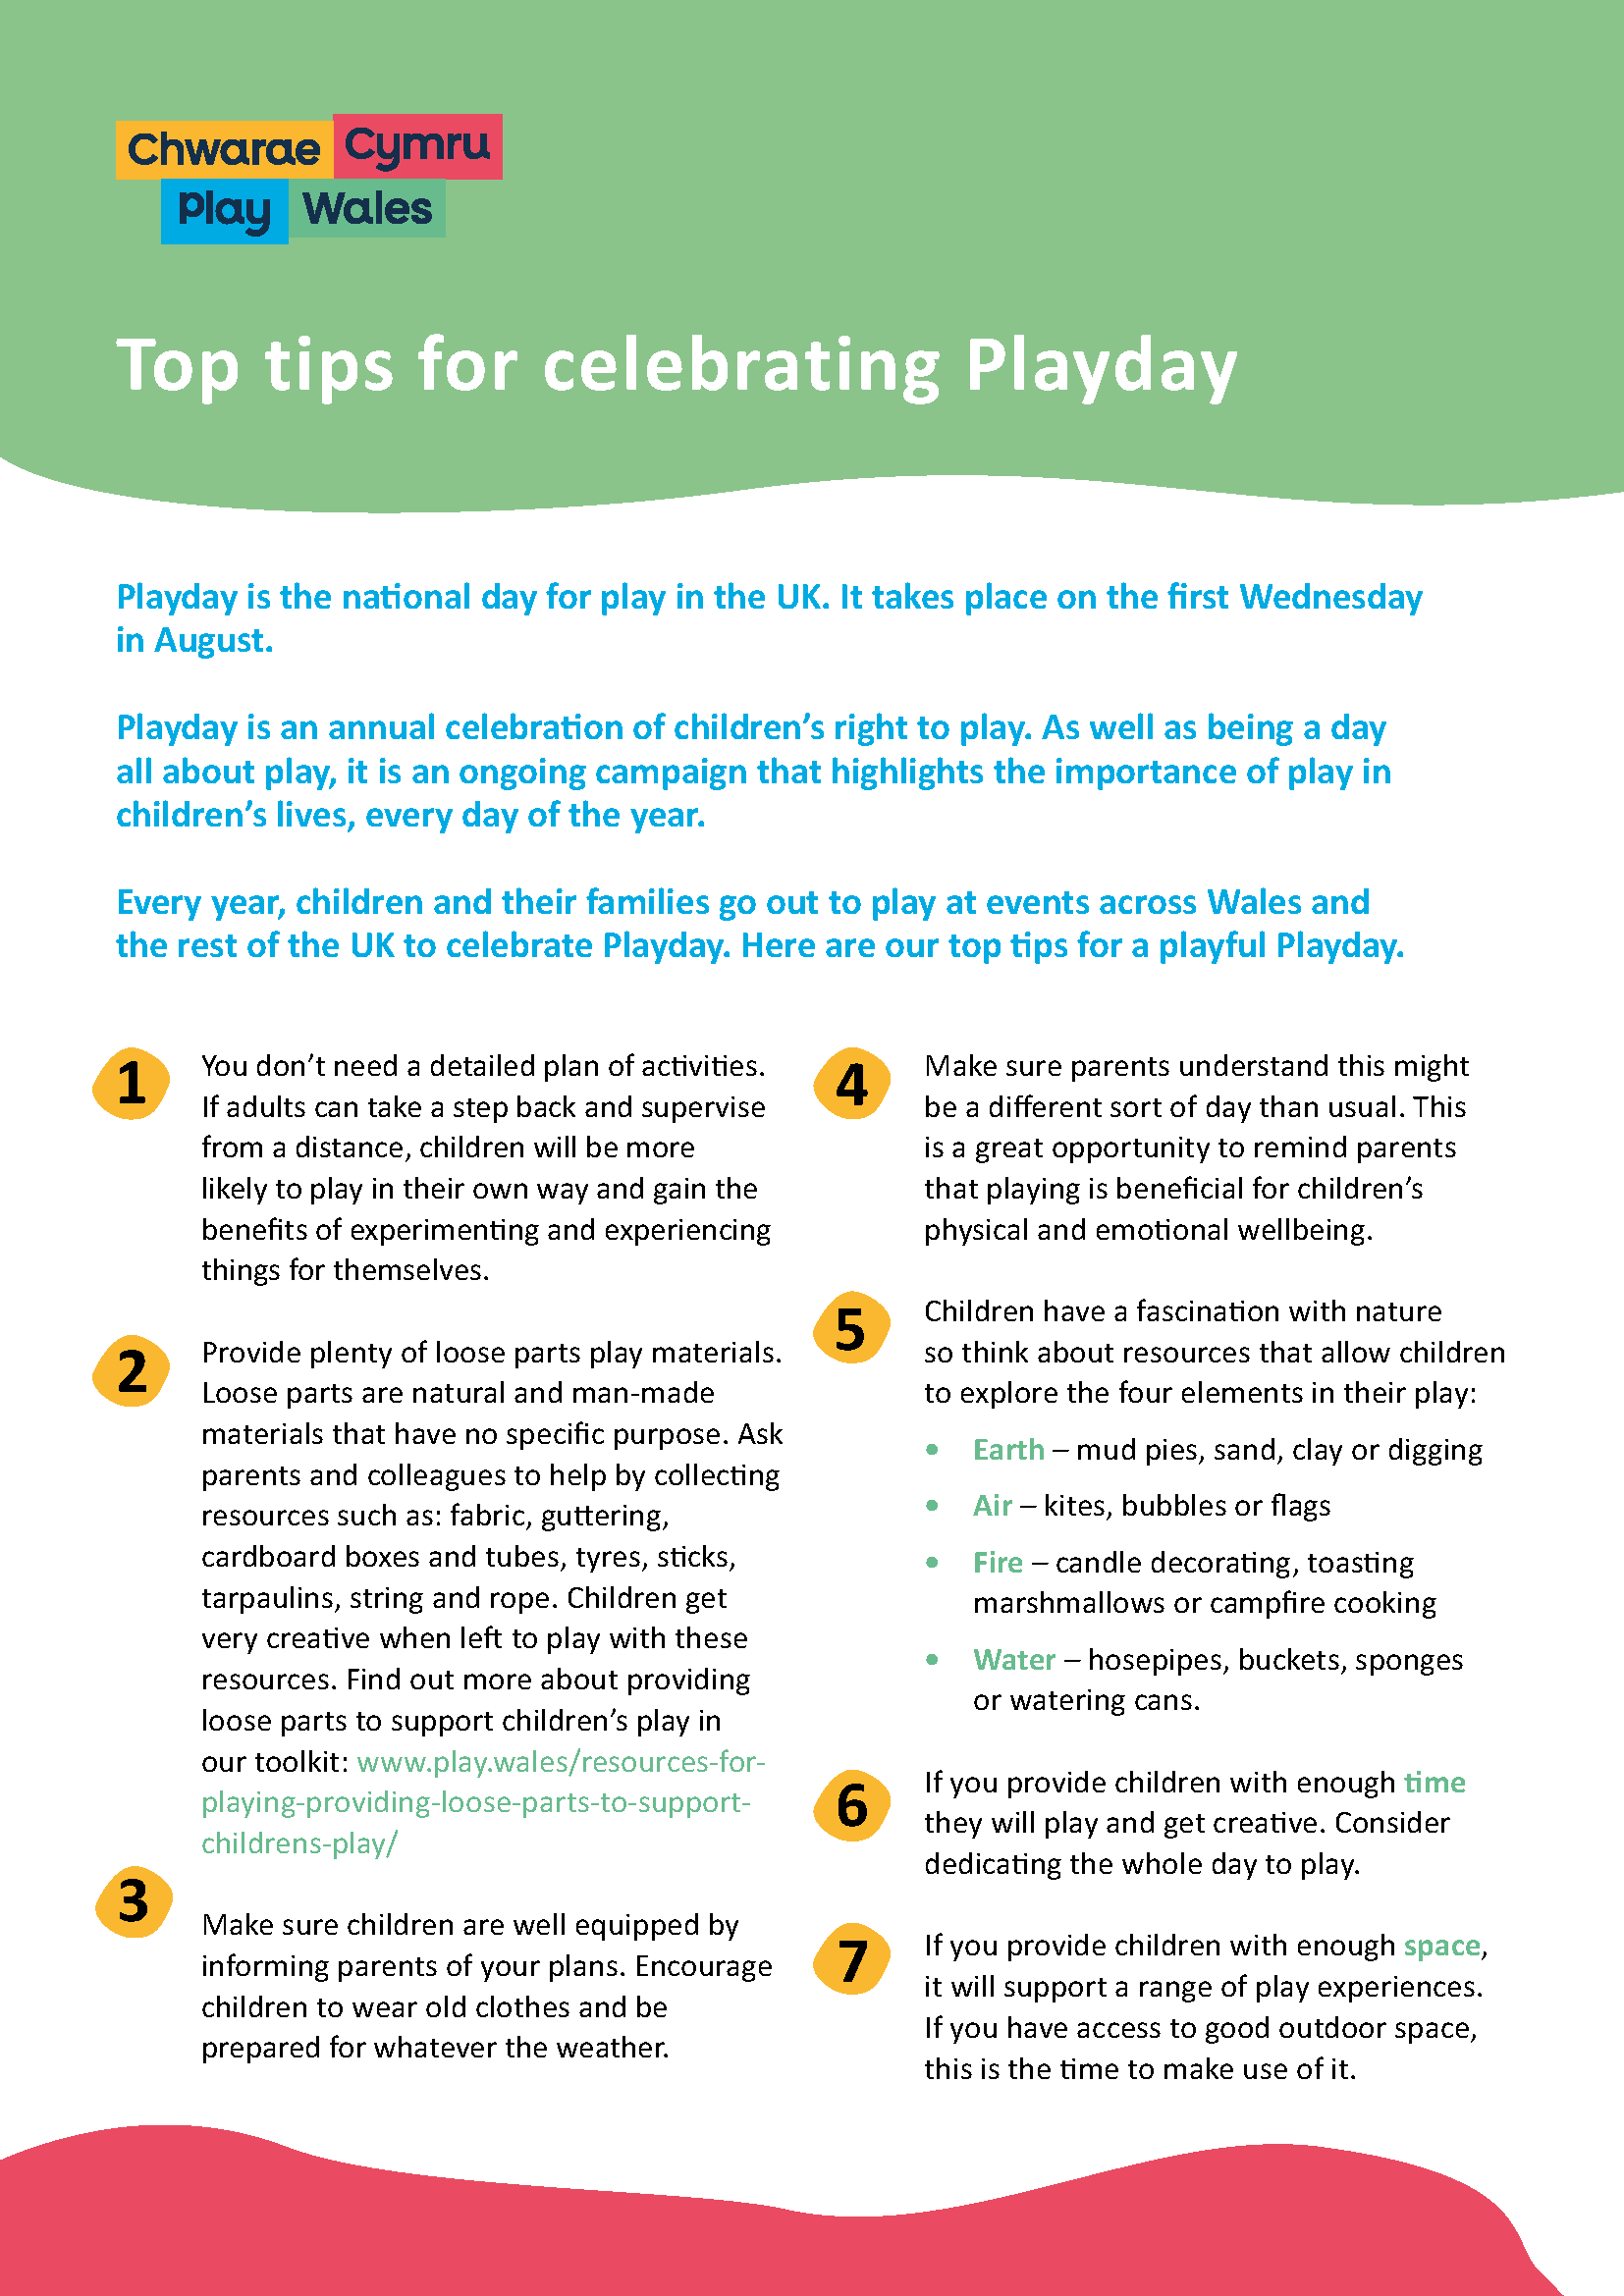 Top tips for celebrating Playday